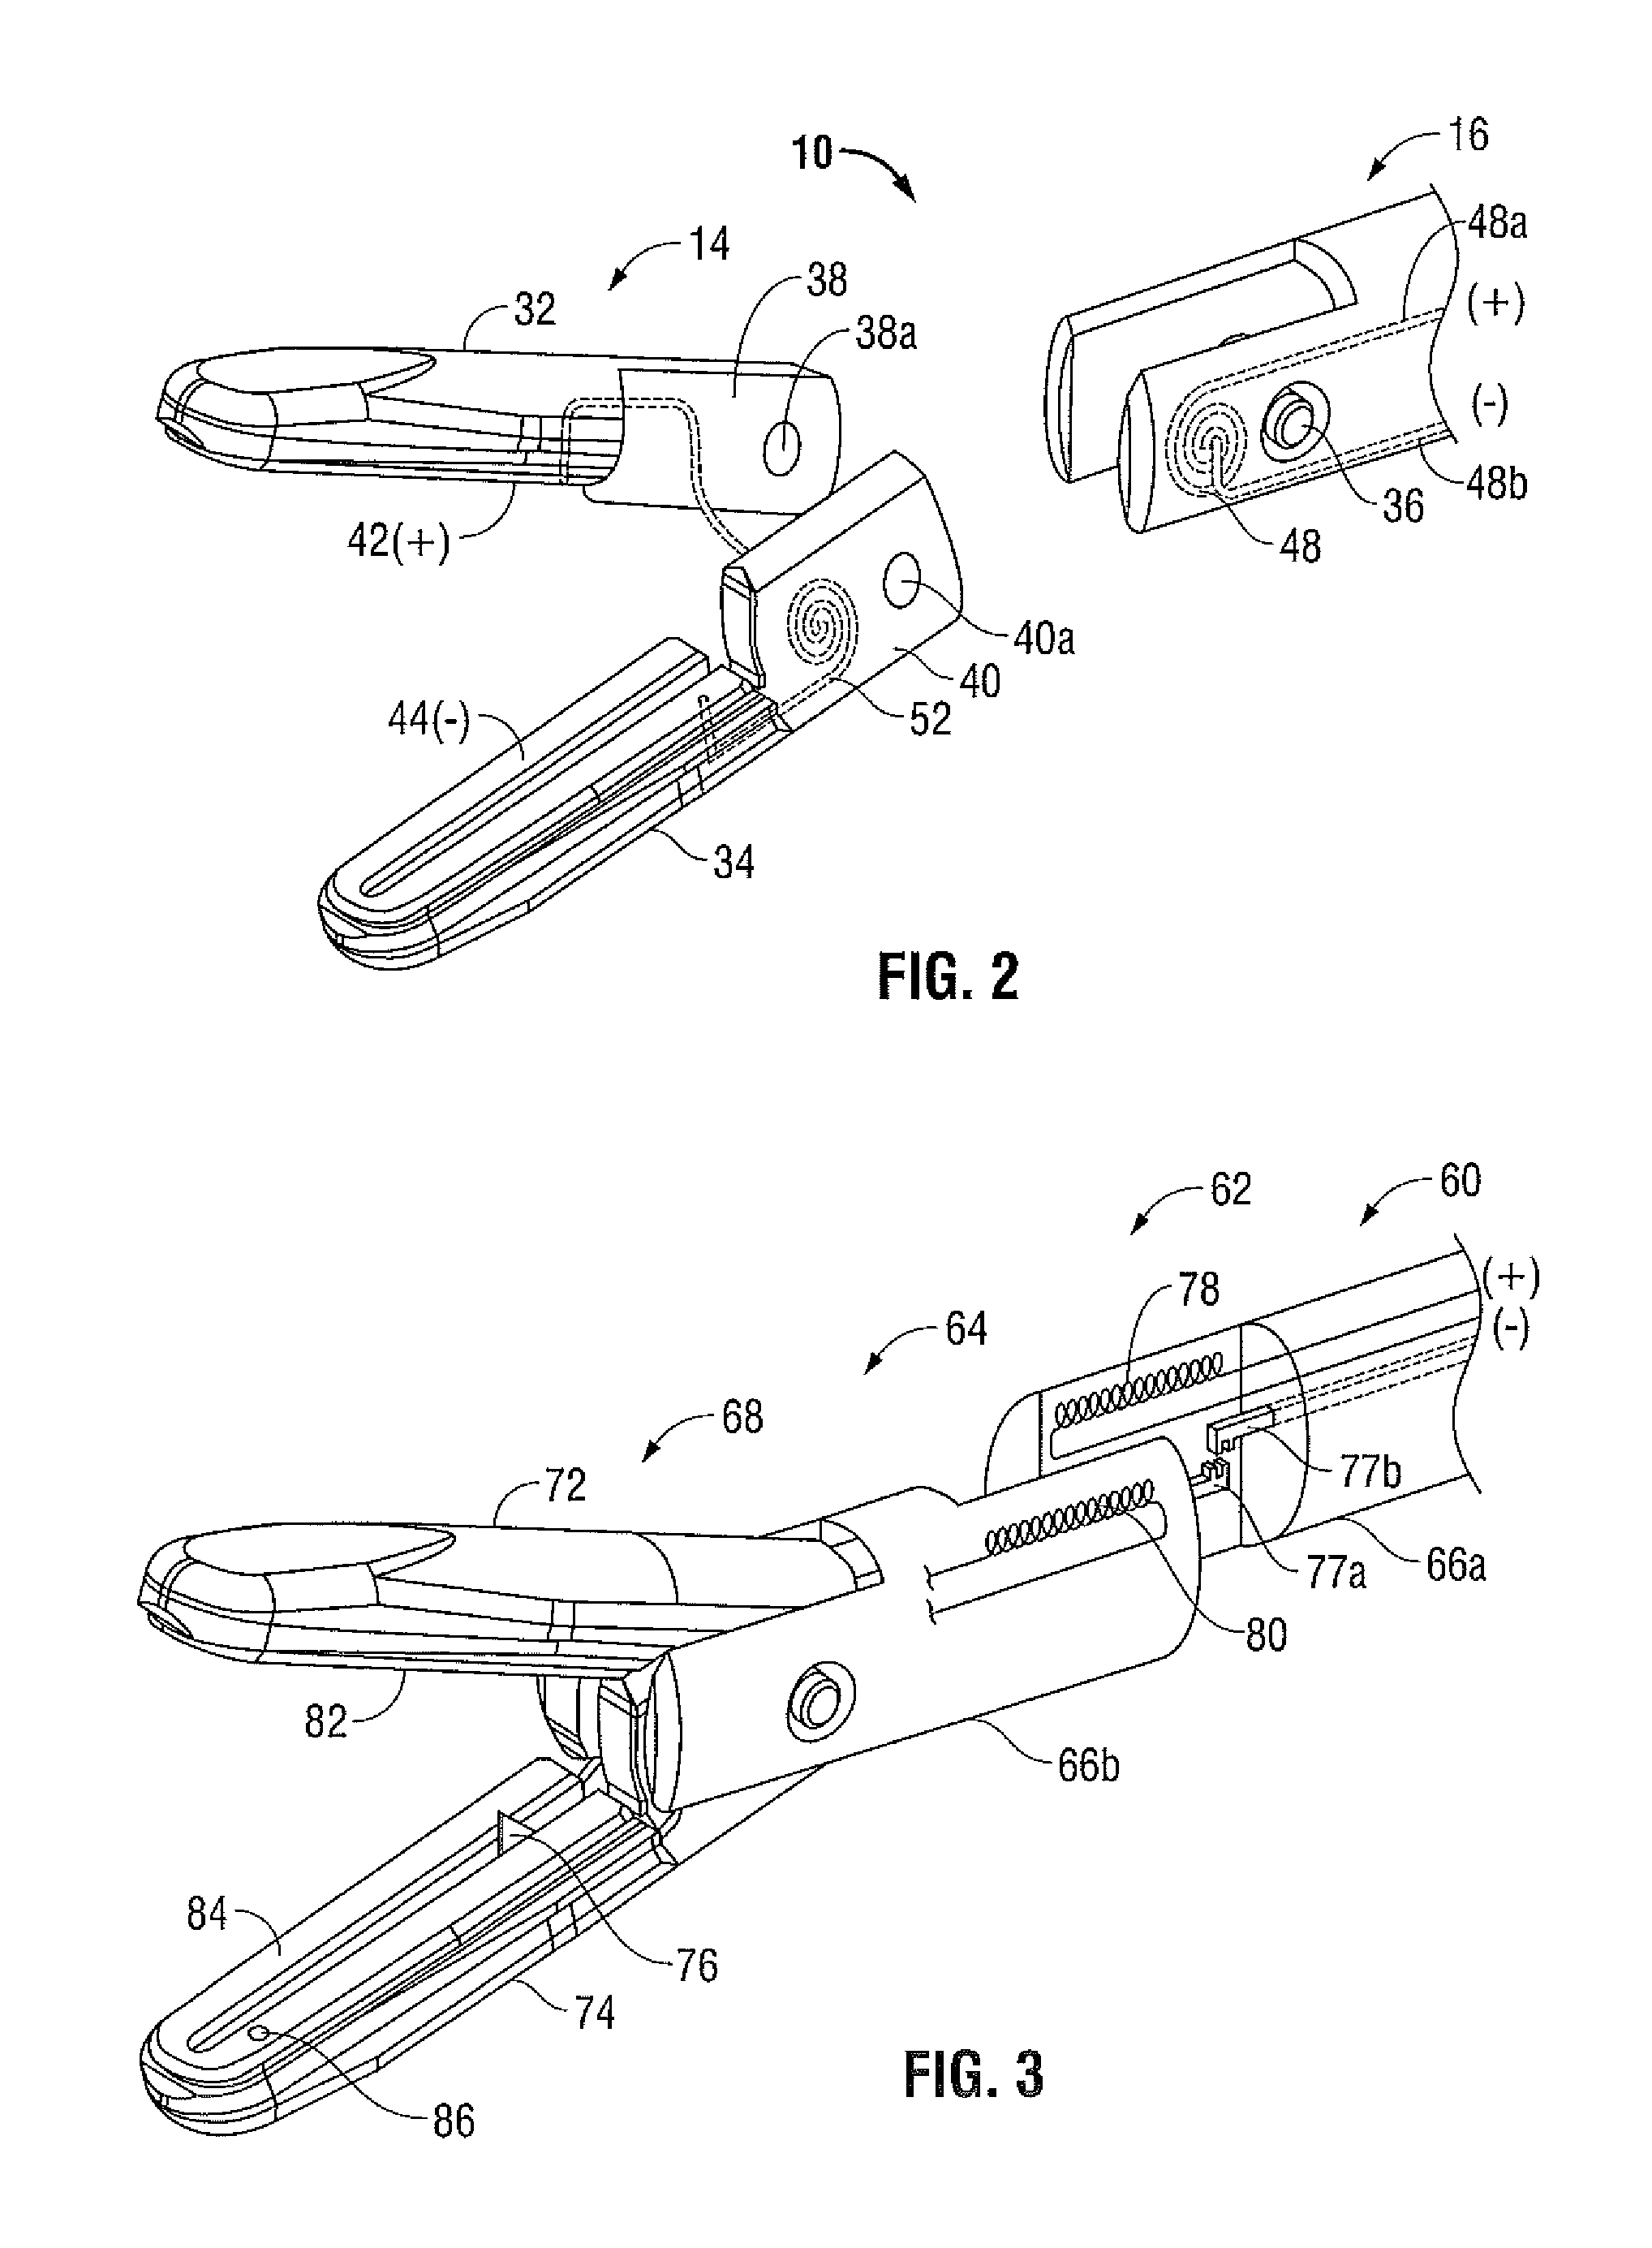 Surgical Instrument with Non-Contact Electrical Coupling